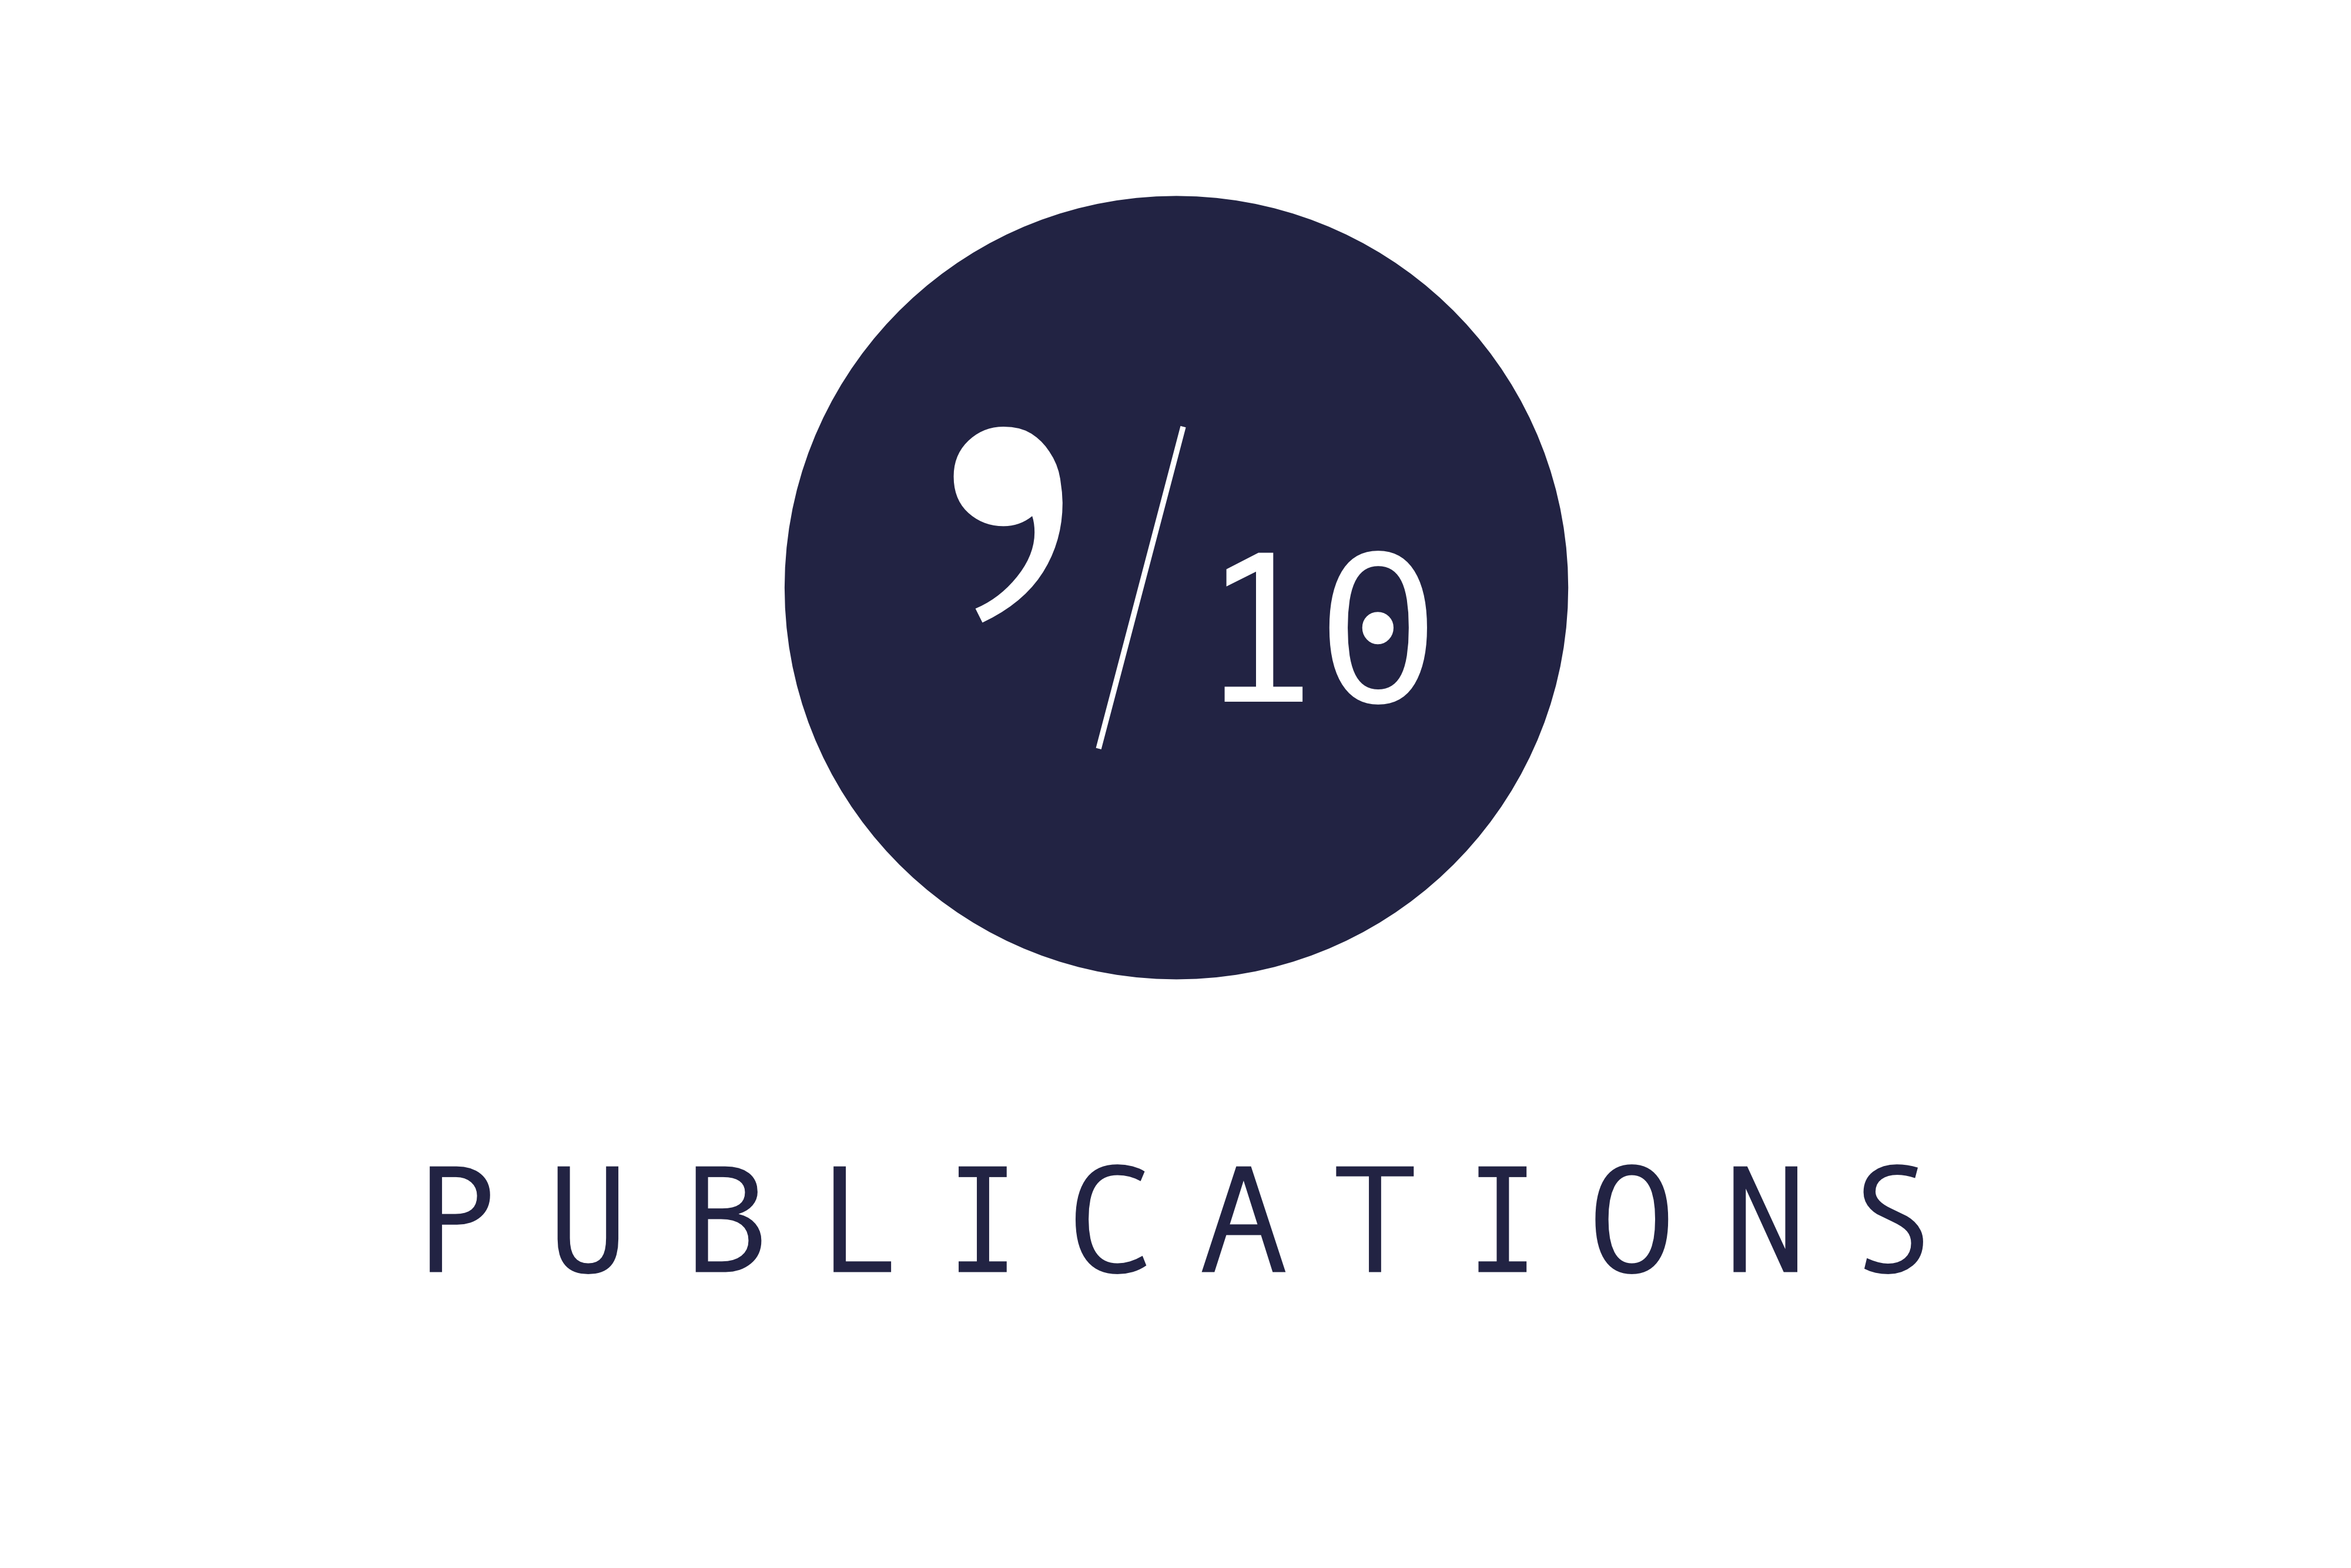 The Nine Ten logo is a navy blue circle with "9/10" in white and the 9 is also an apostrophe. Beneath it in all caps is the word "Publications".